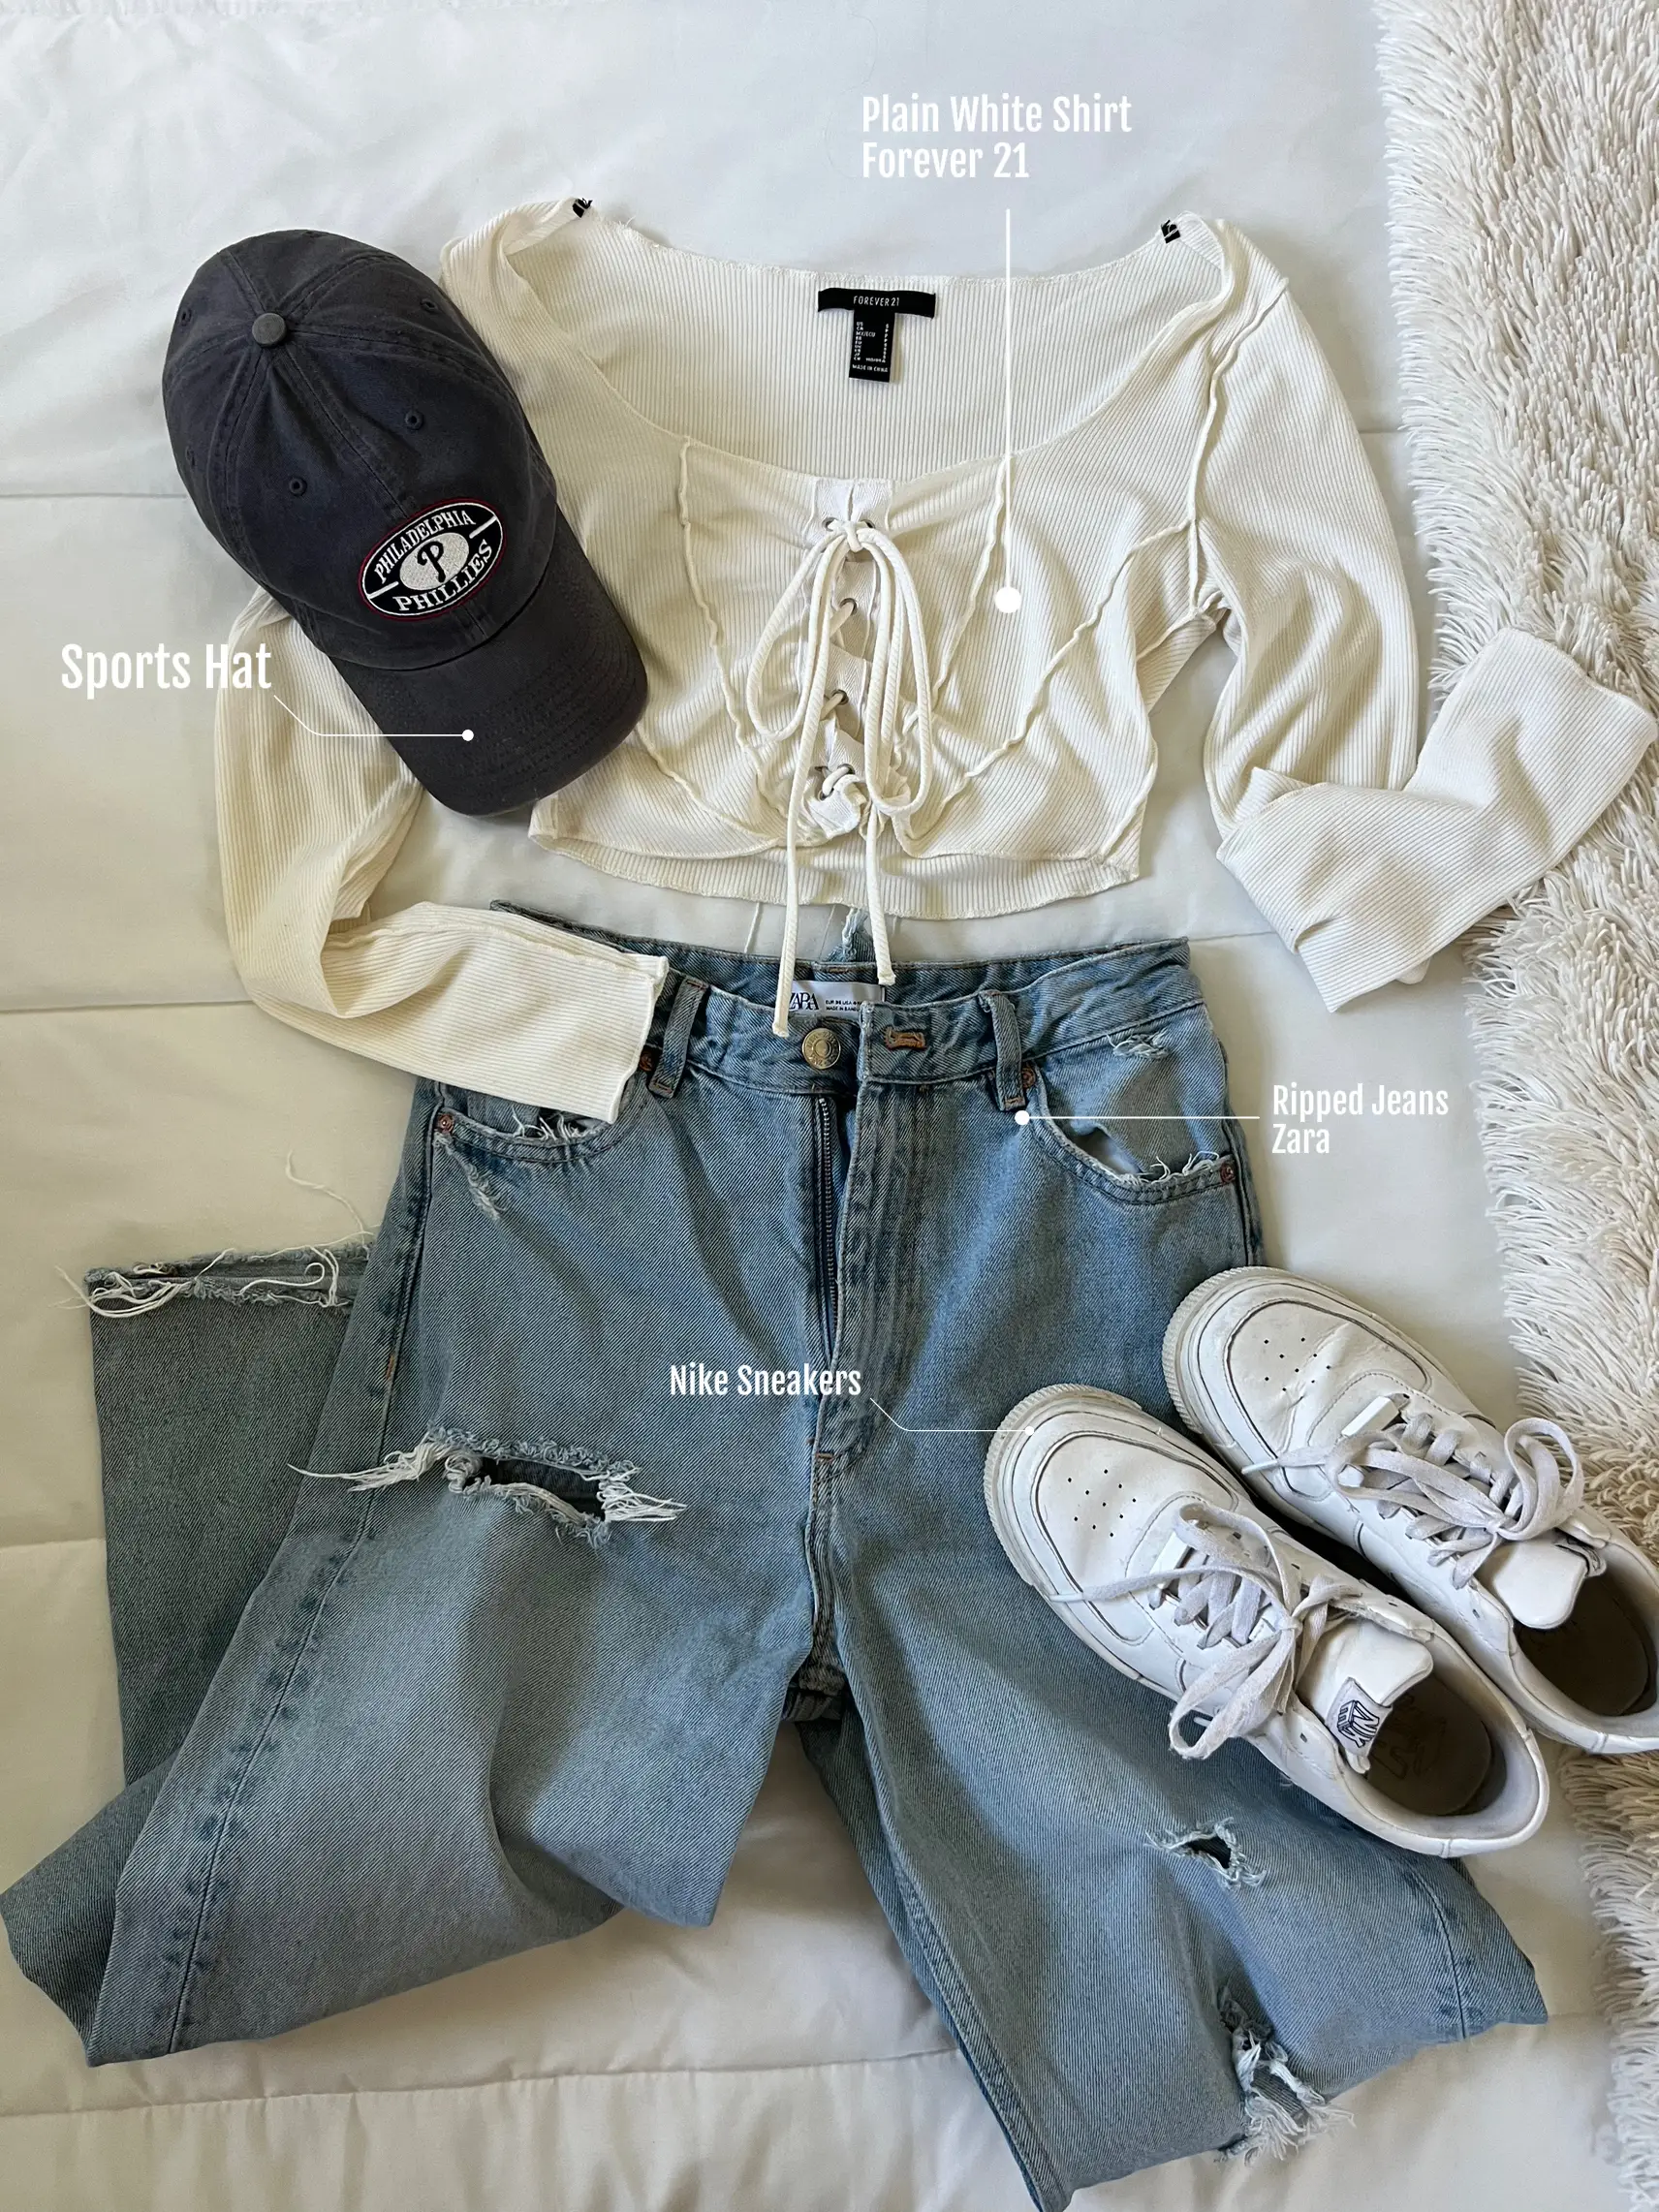 baseball jersey outfit ideas#outfitideas #outfitinspiration, Outfit Idea